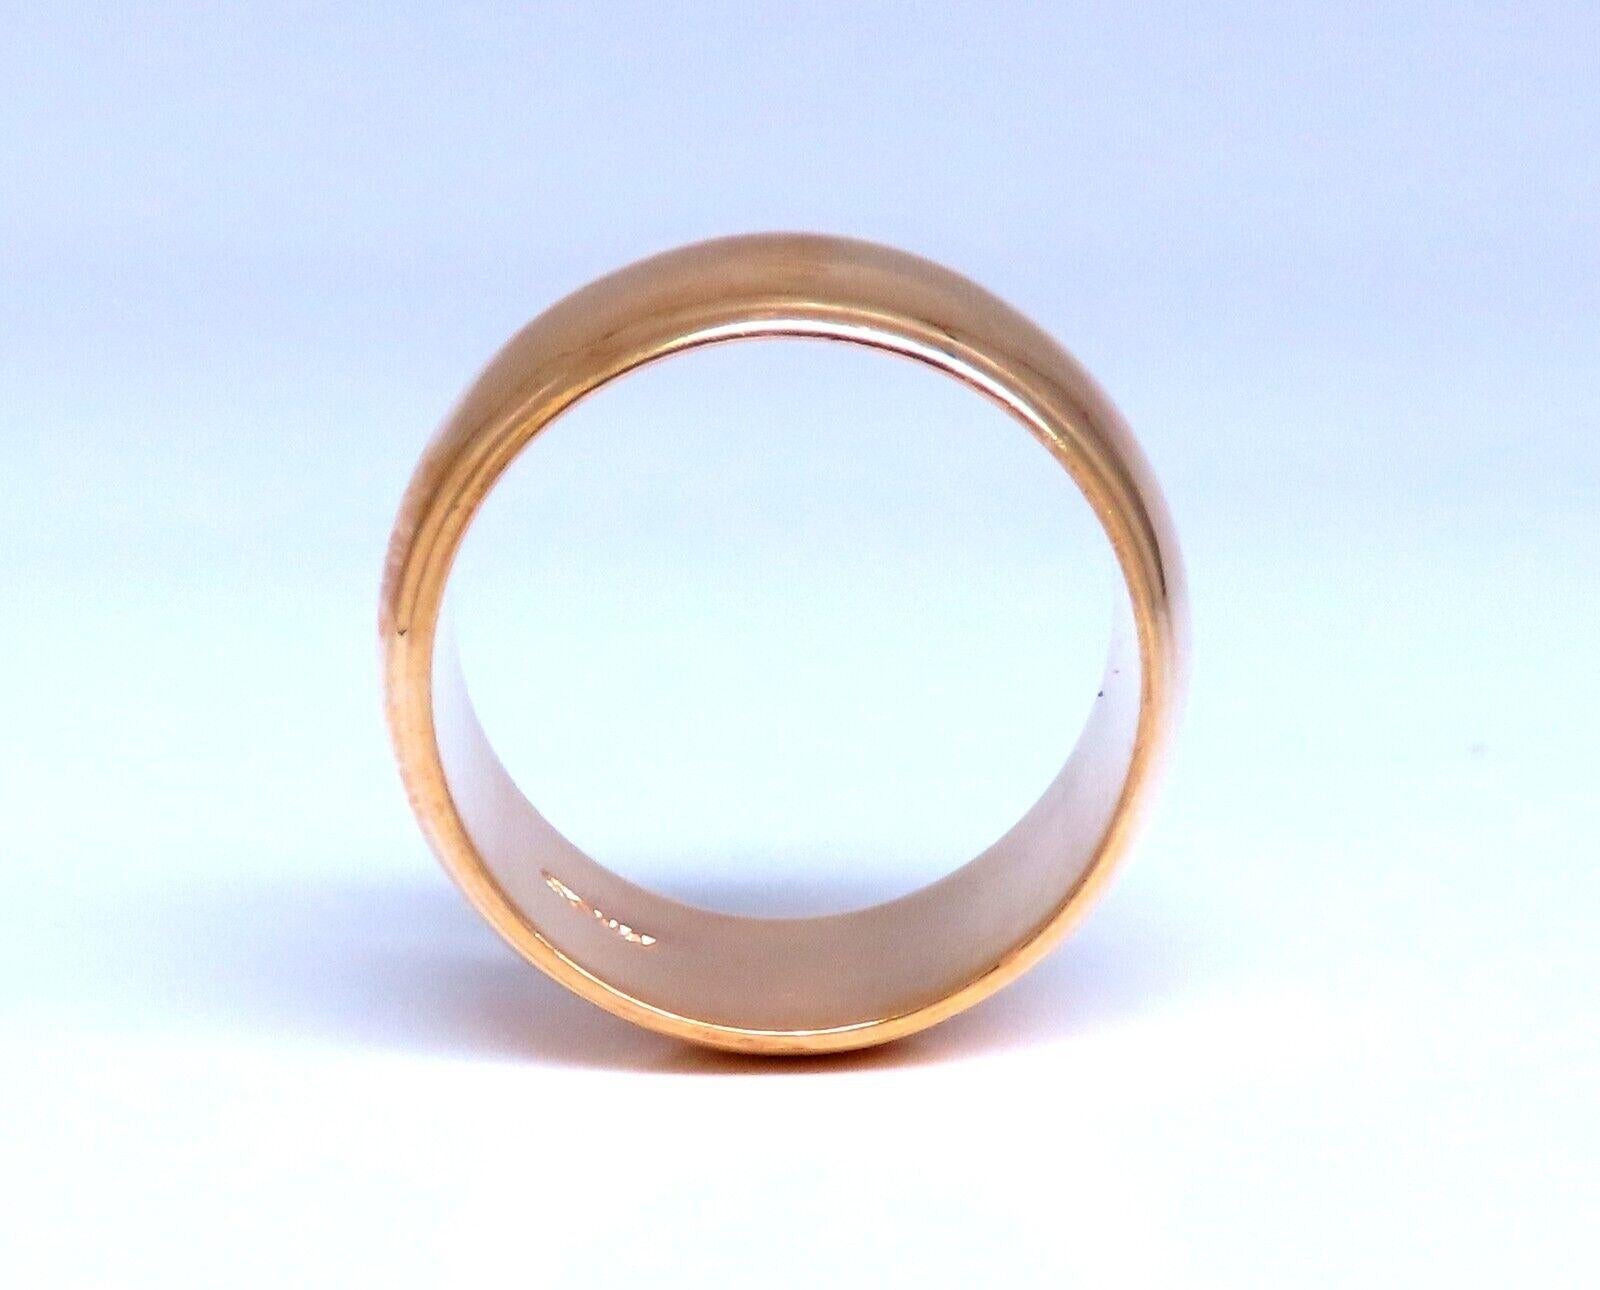 Classic Gold band.

Nice detail on Outer

10.5mm wide

1.8 mm depth

14 karat yellow gold 10.3 g

Size 6.75